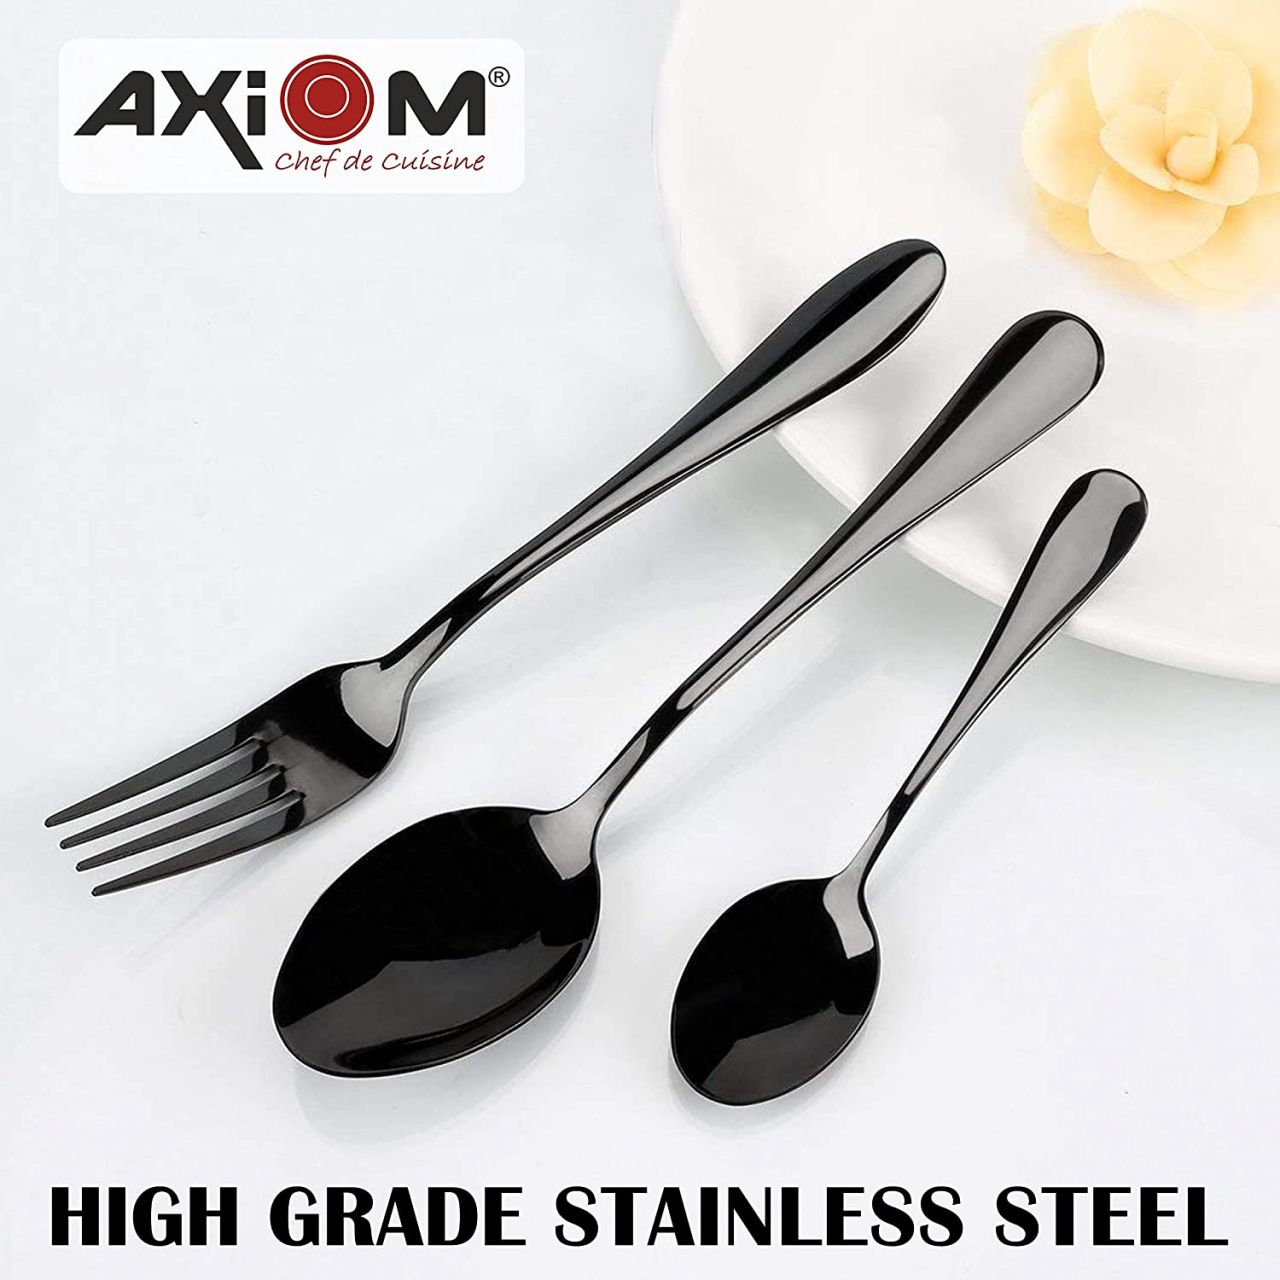 AXIOM Black Cutlery Set Stainless Steel. 18 Pieces Premium Spoons & Forks